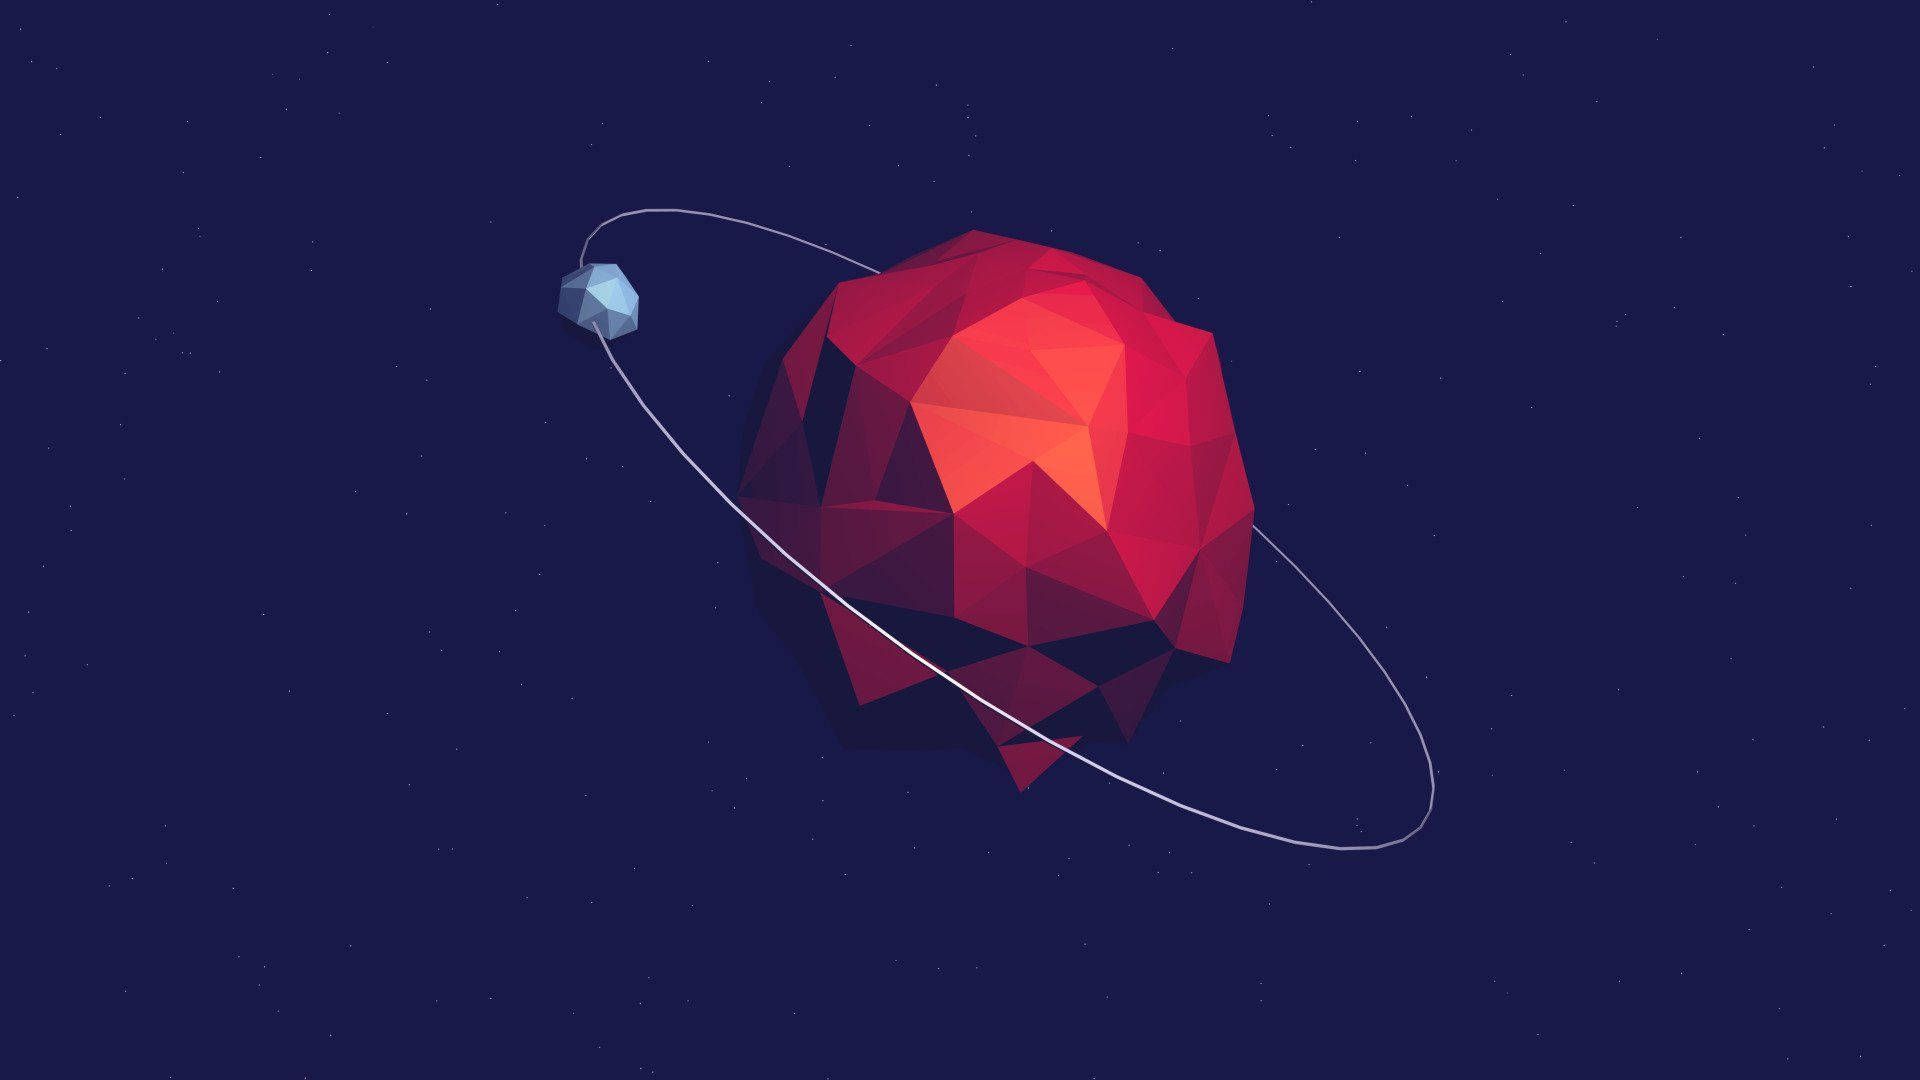 Low poly space wallpaper with a red planet - Low poly